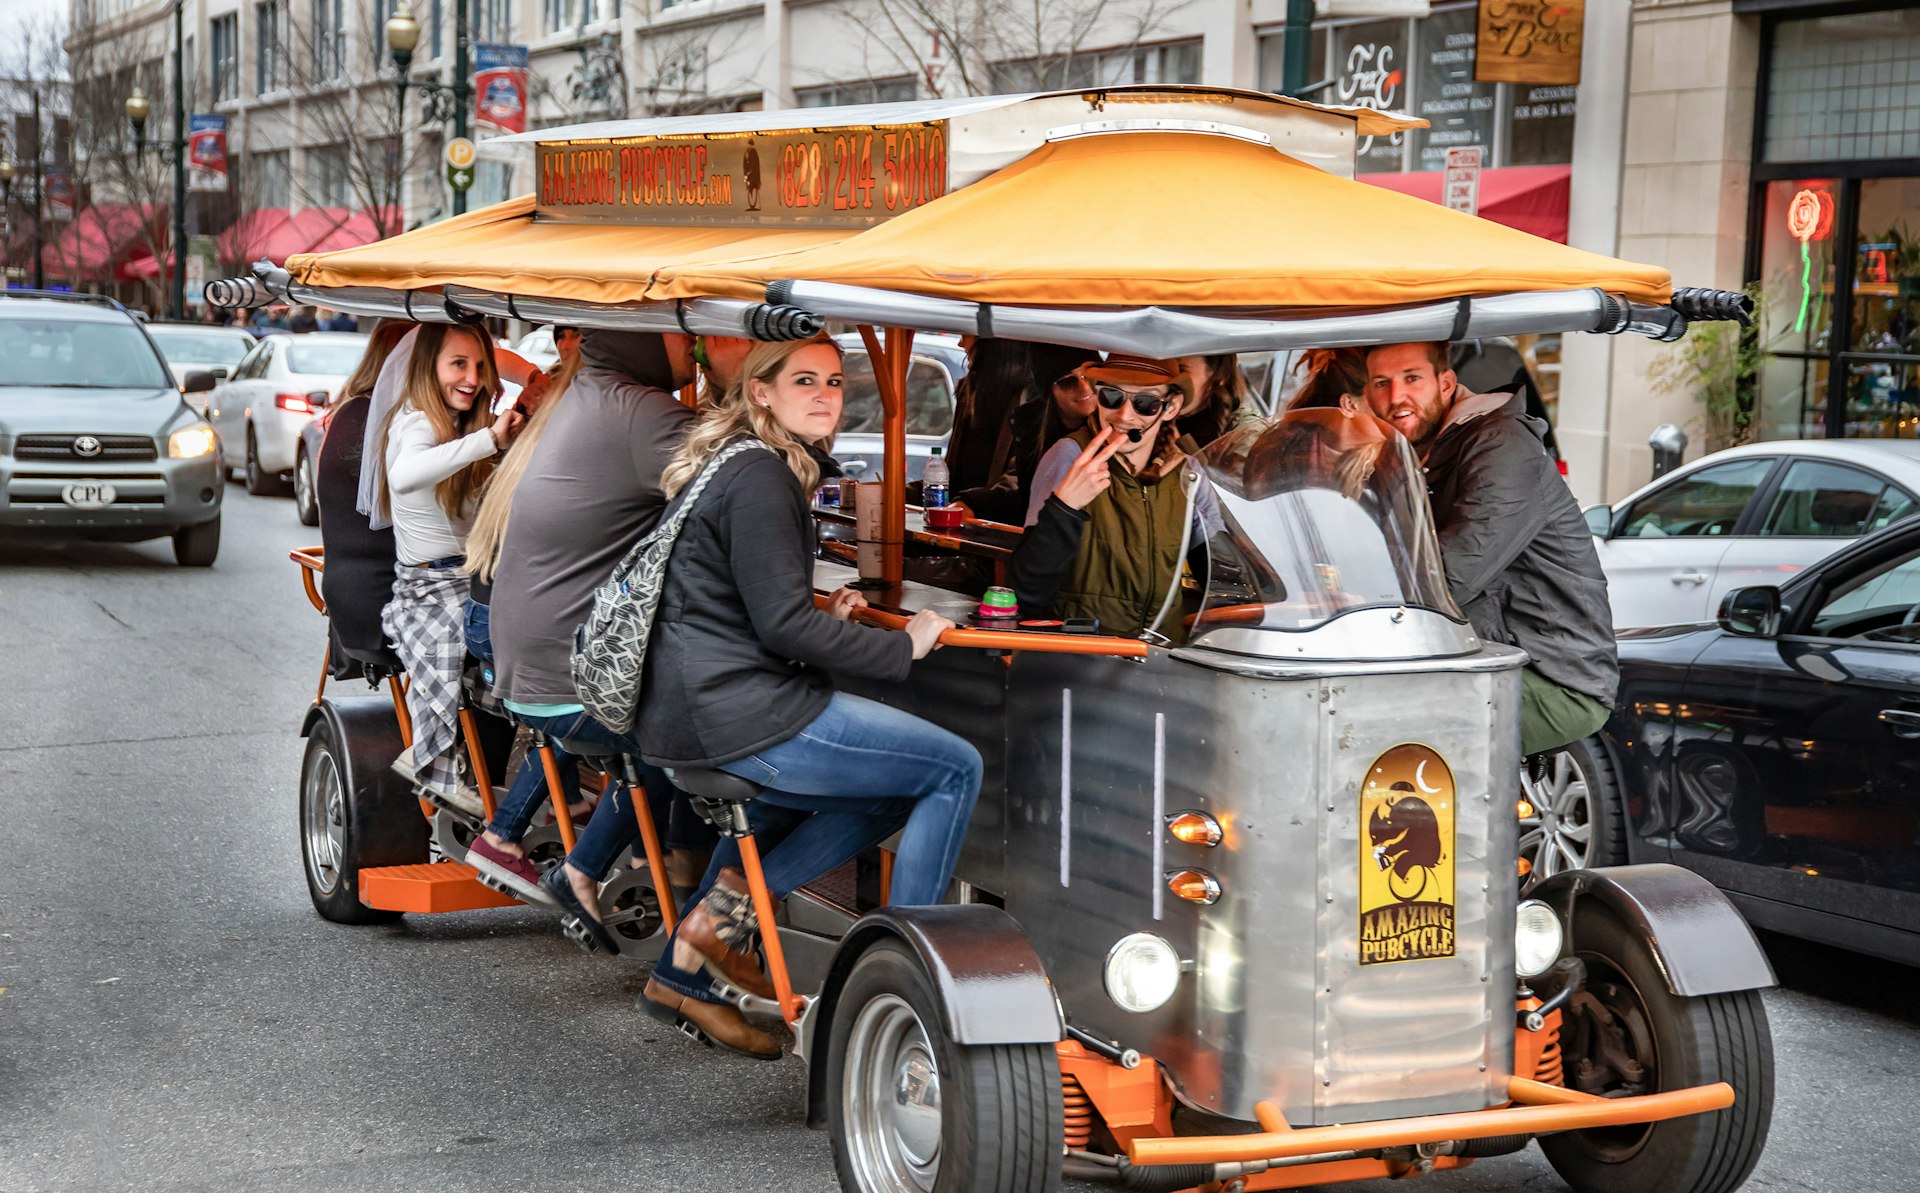  A 13 seater pedal-powered touring vehicle transports tourists around town, with stops at pubs en route - Asheville, USA